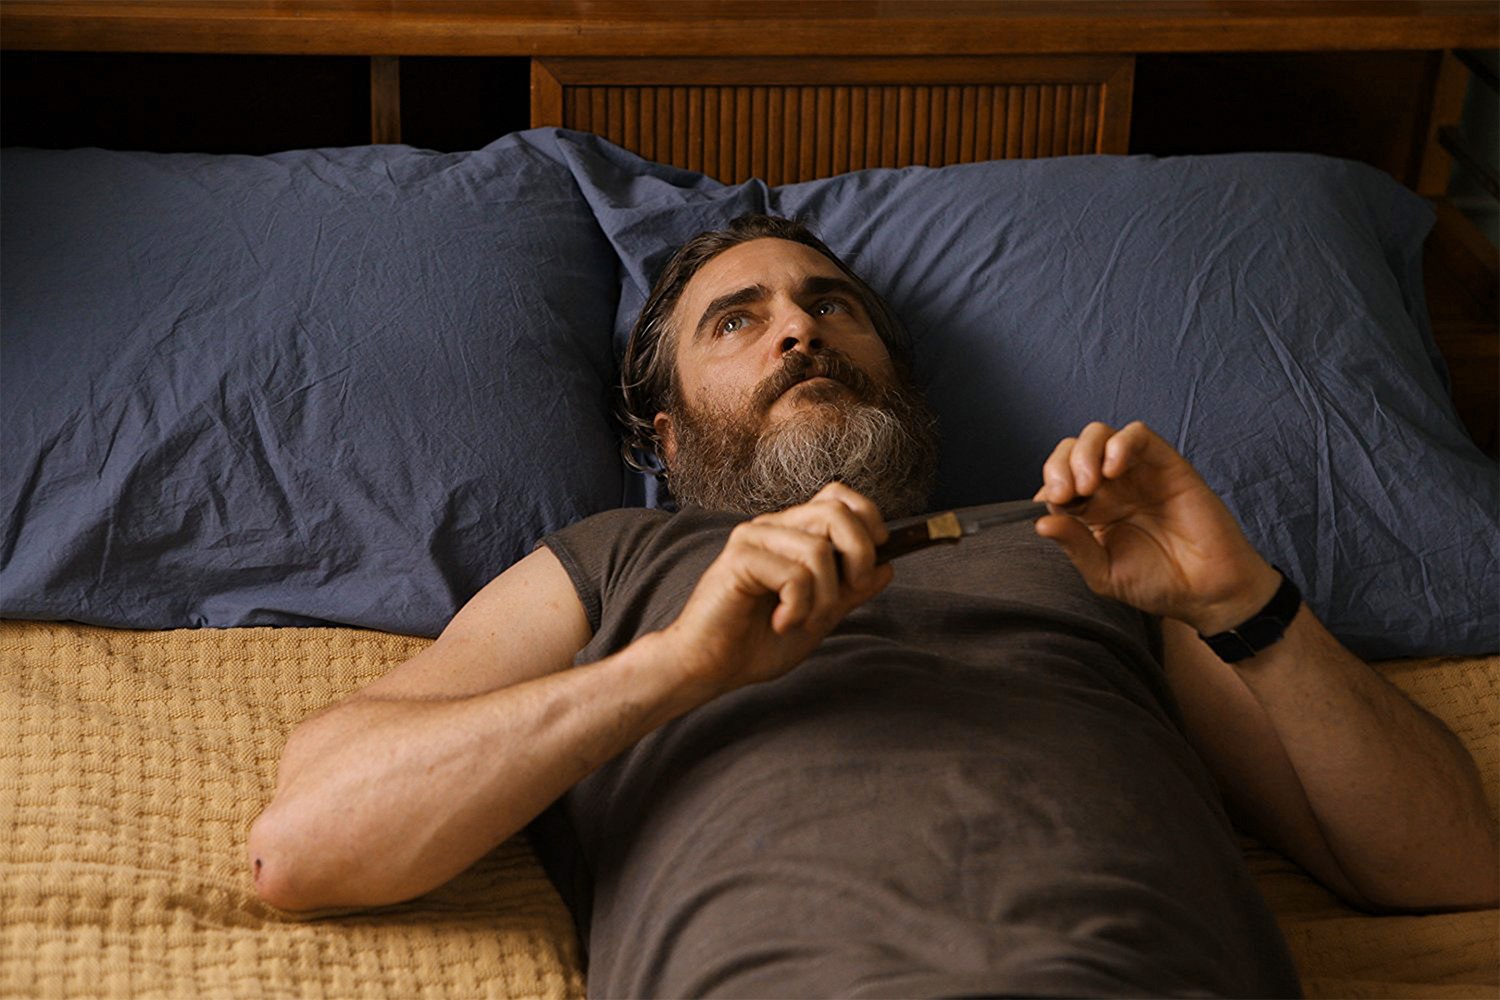 joaquin phoenix in You Were Never Really Here